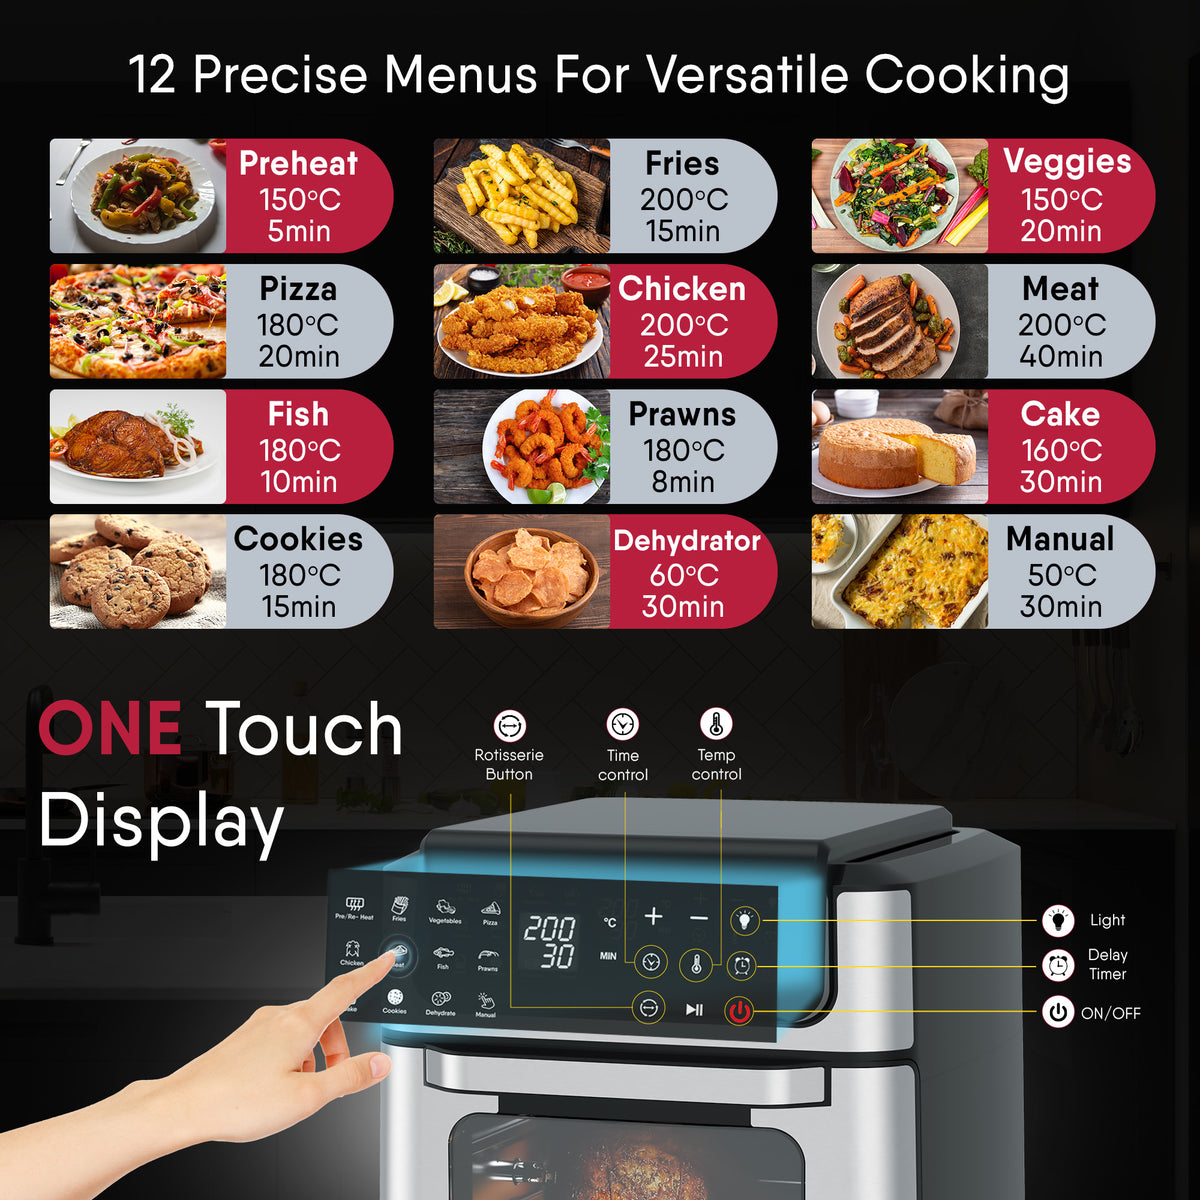 Geek AiroCook Digix 30L - All in One Air Fryer Oven with Dehydrating  Functions